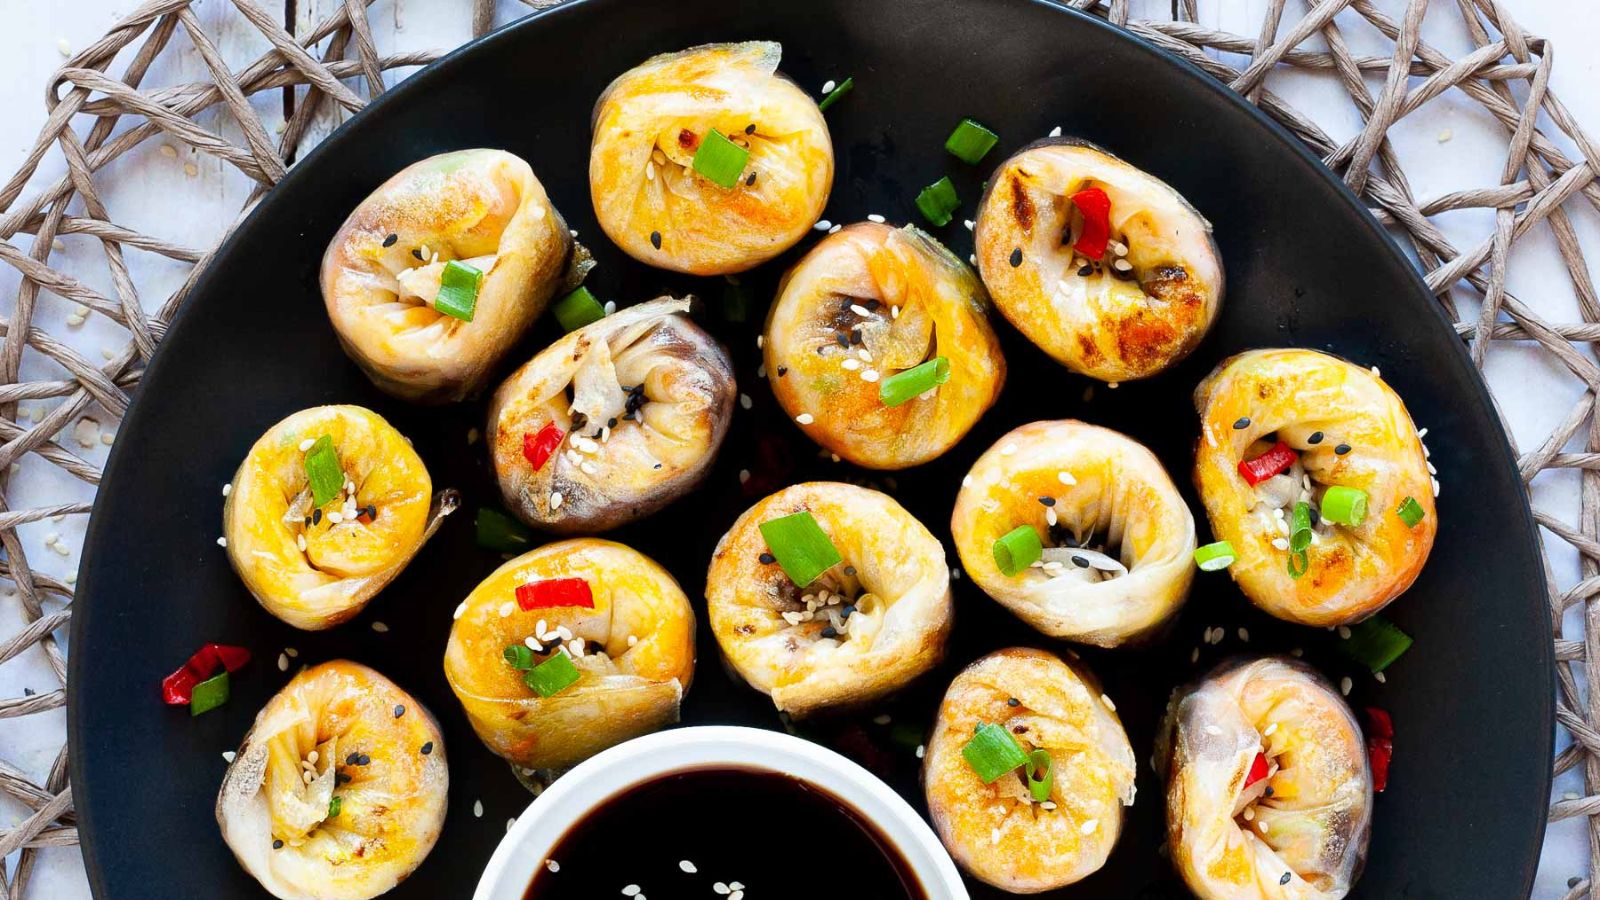 <p>These crispy rice paper dumplings are a delicious alternative to traditional dumplings. With a filling of marinated king oyster mushrooms, vegetables, and mung bean sprouts, they are bursting with flavor and texture.</p><p><strong>Recipe: <a href="https://mypureplants.com/vegan-duck-dumplings-rice-paper/">rice paper dumplings</a></strong></p>